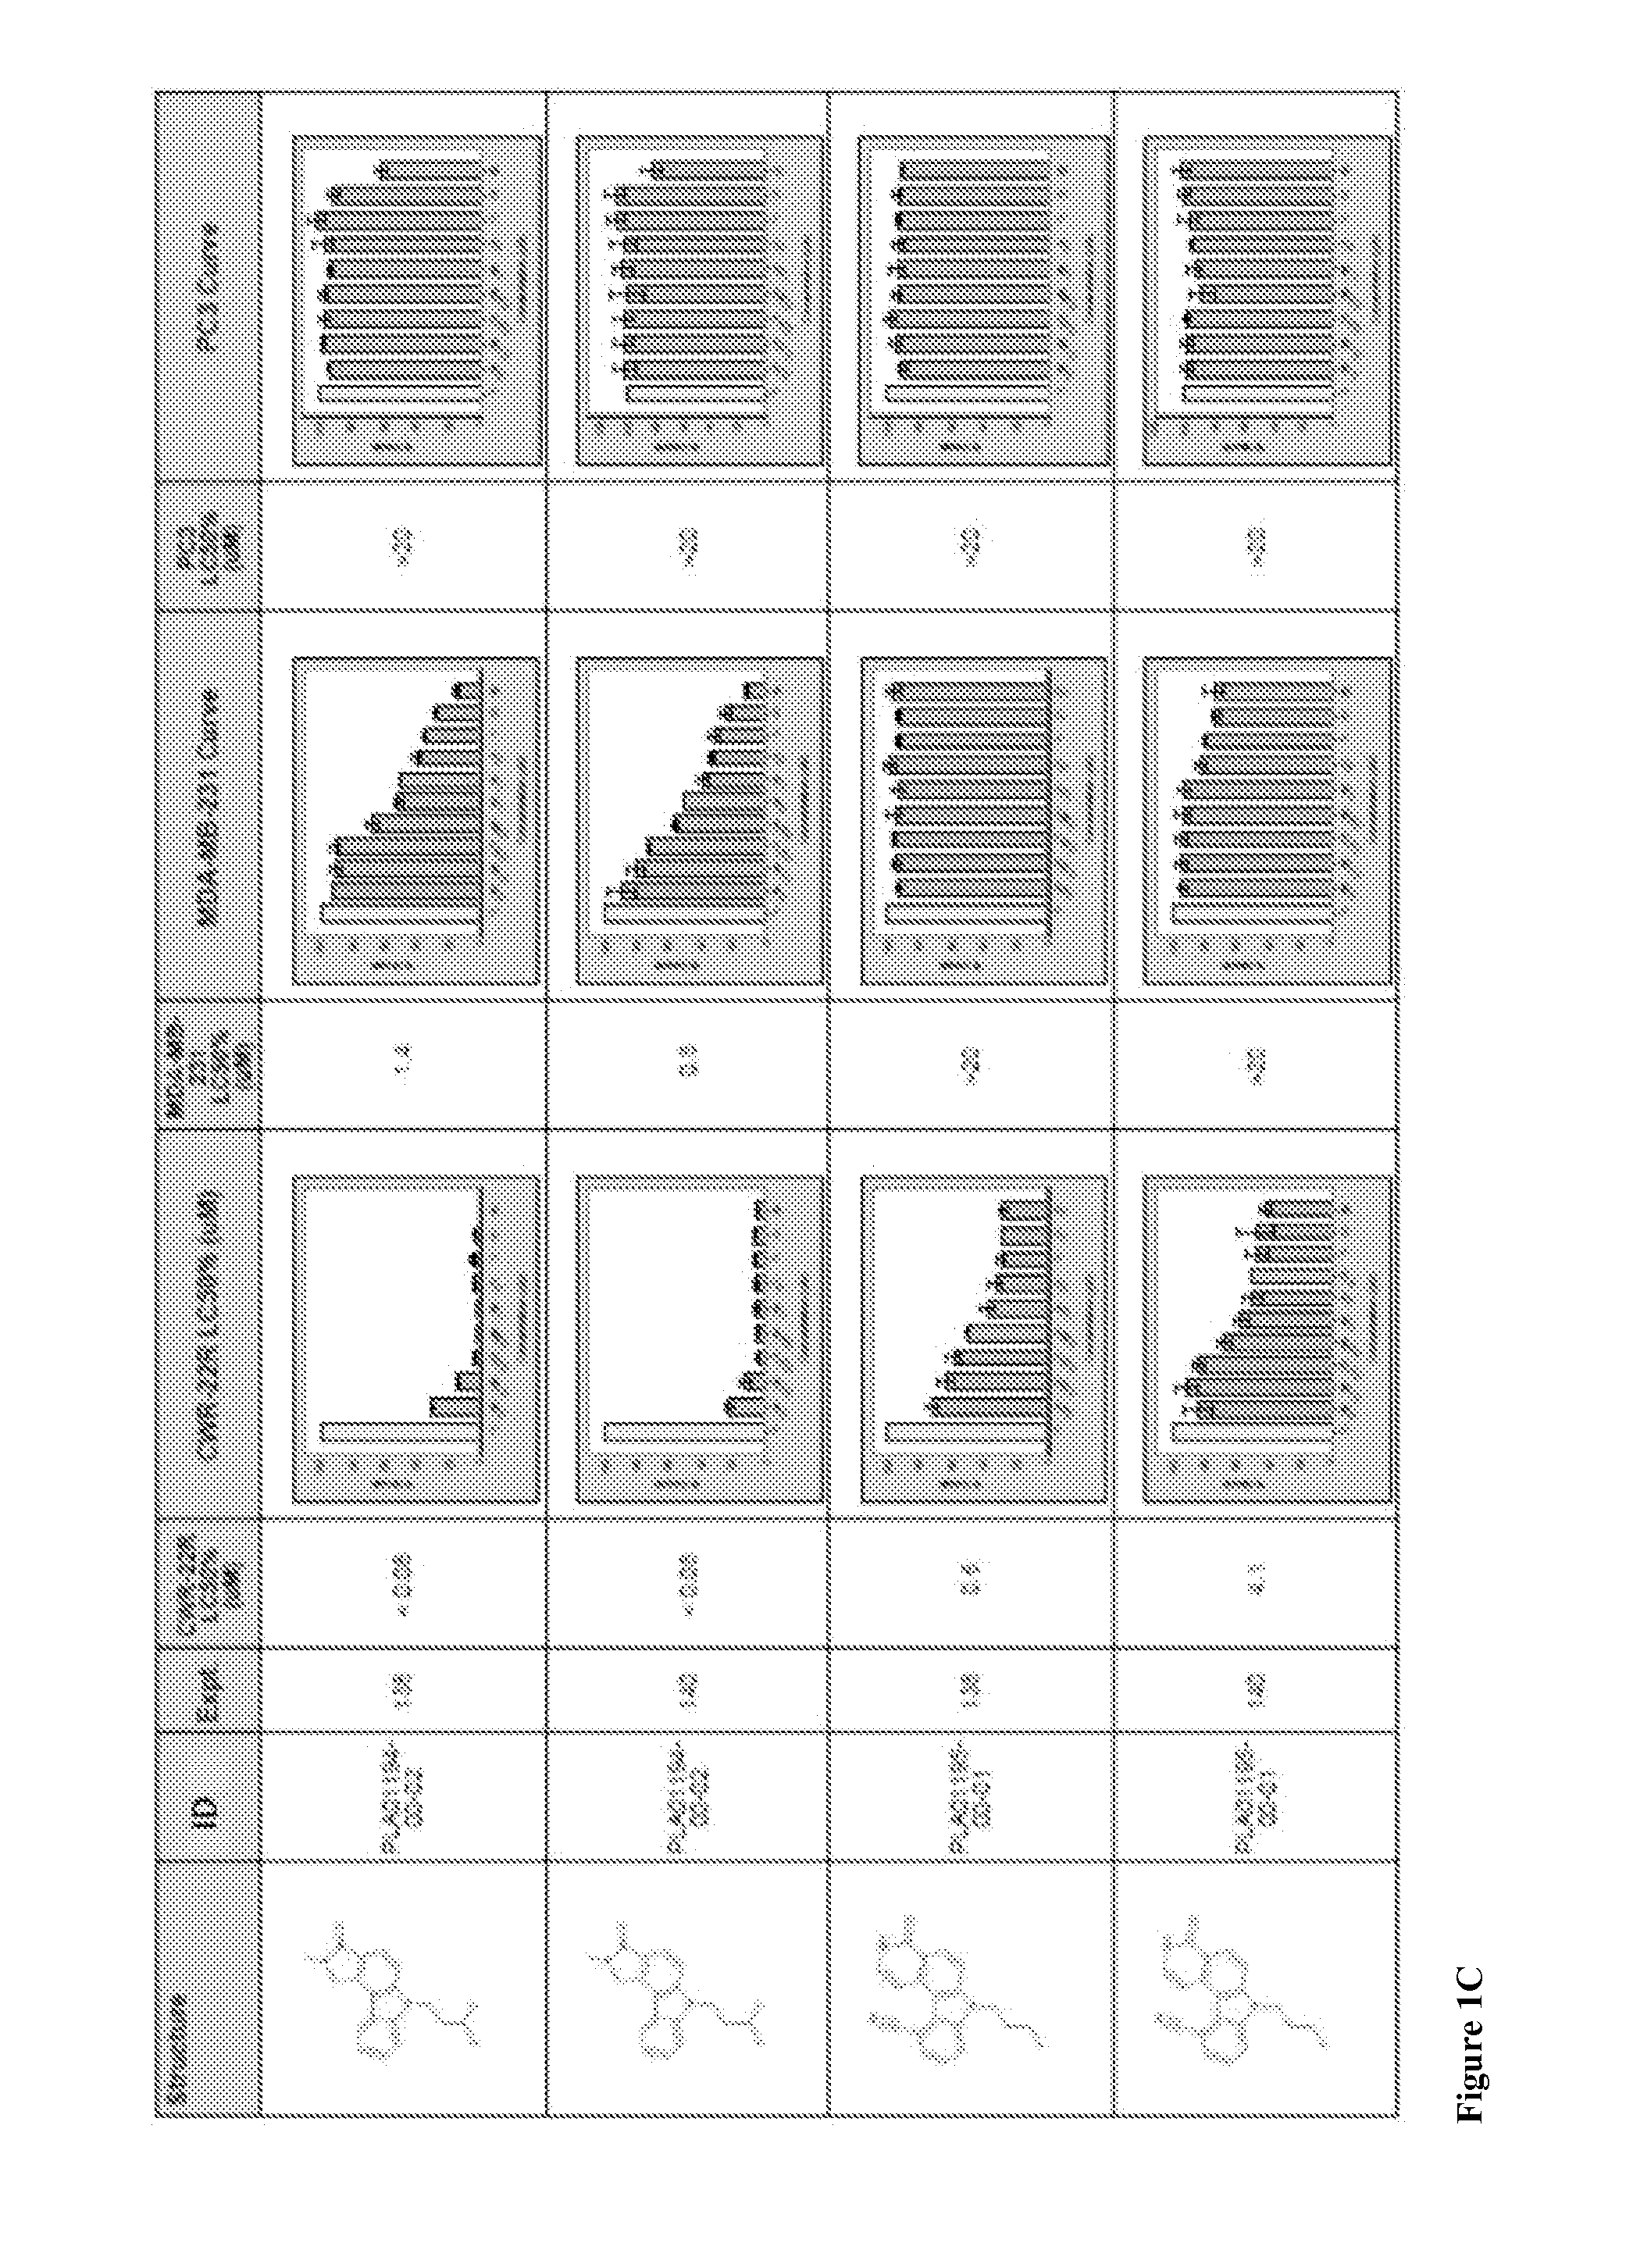 Compounds and methods for treating cancers